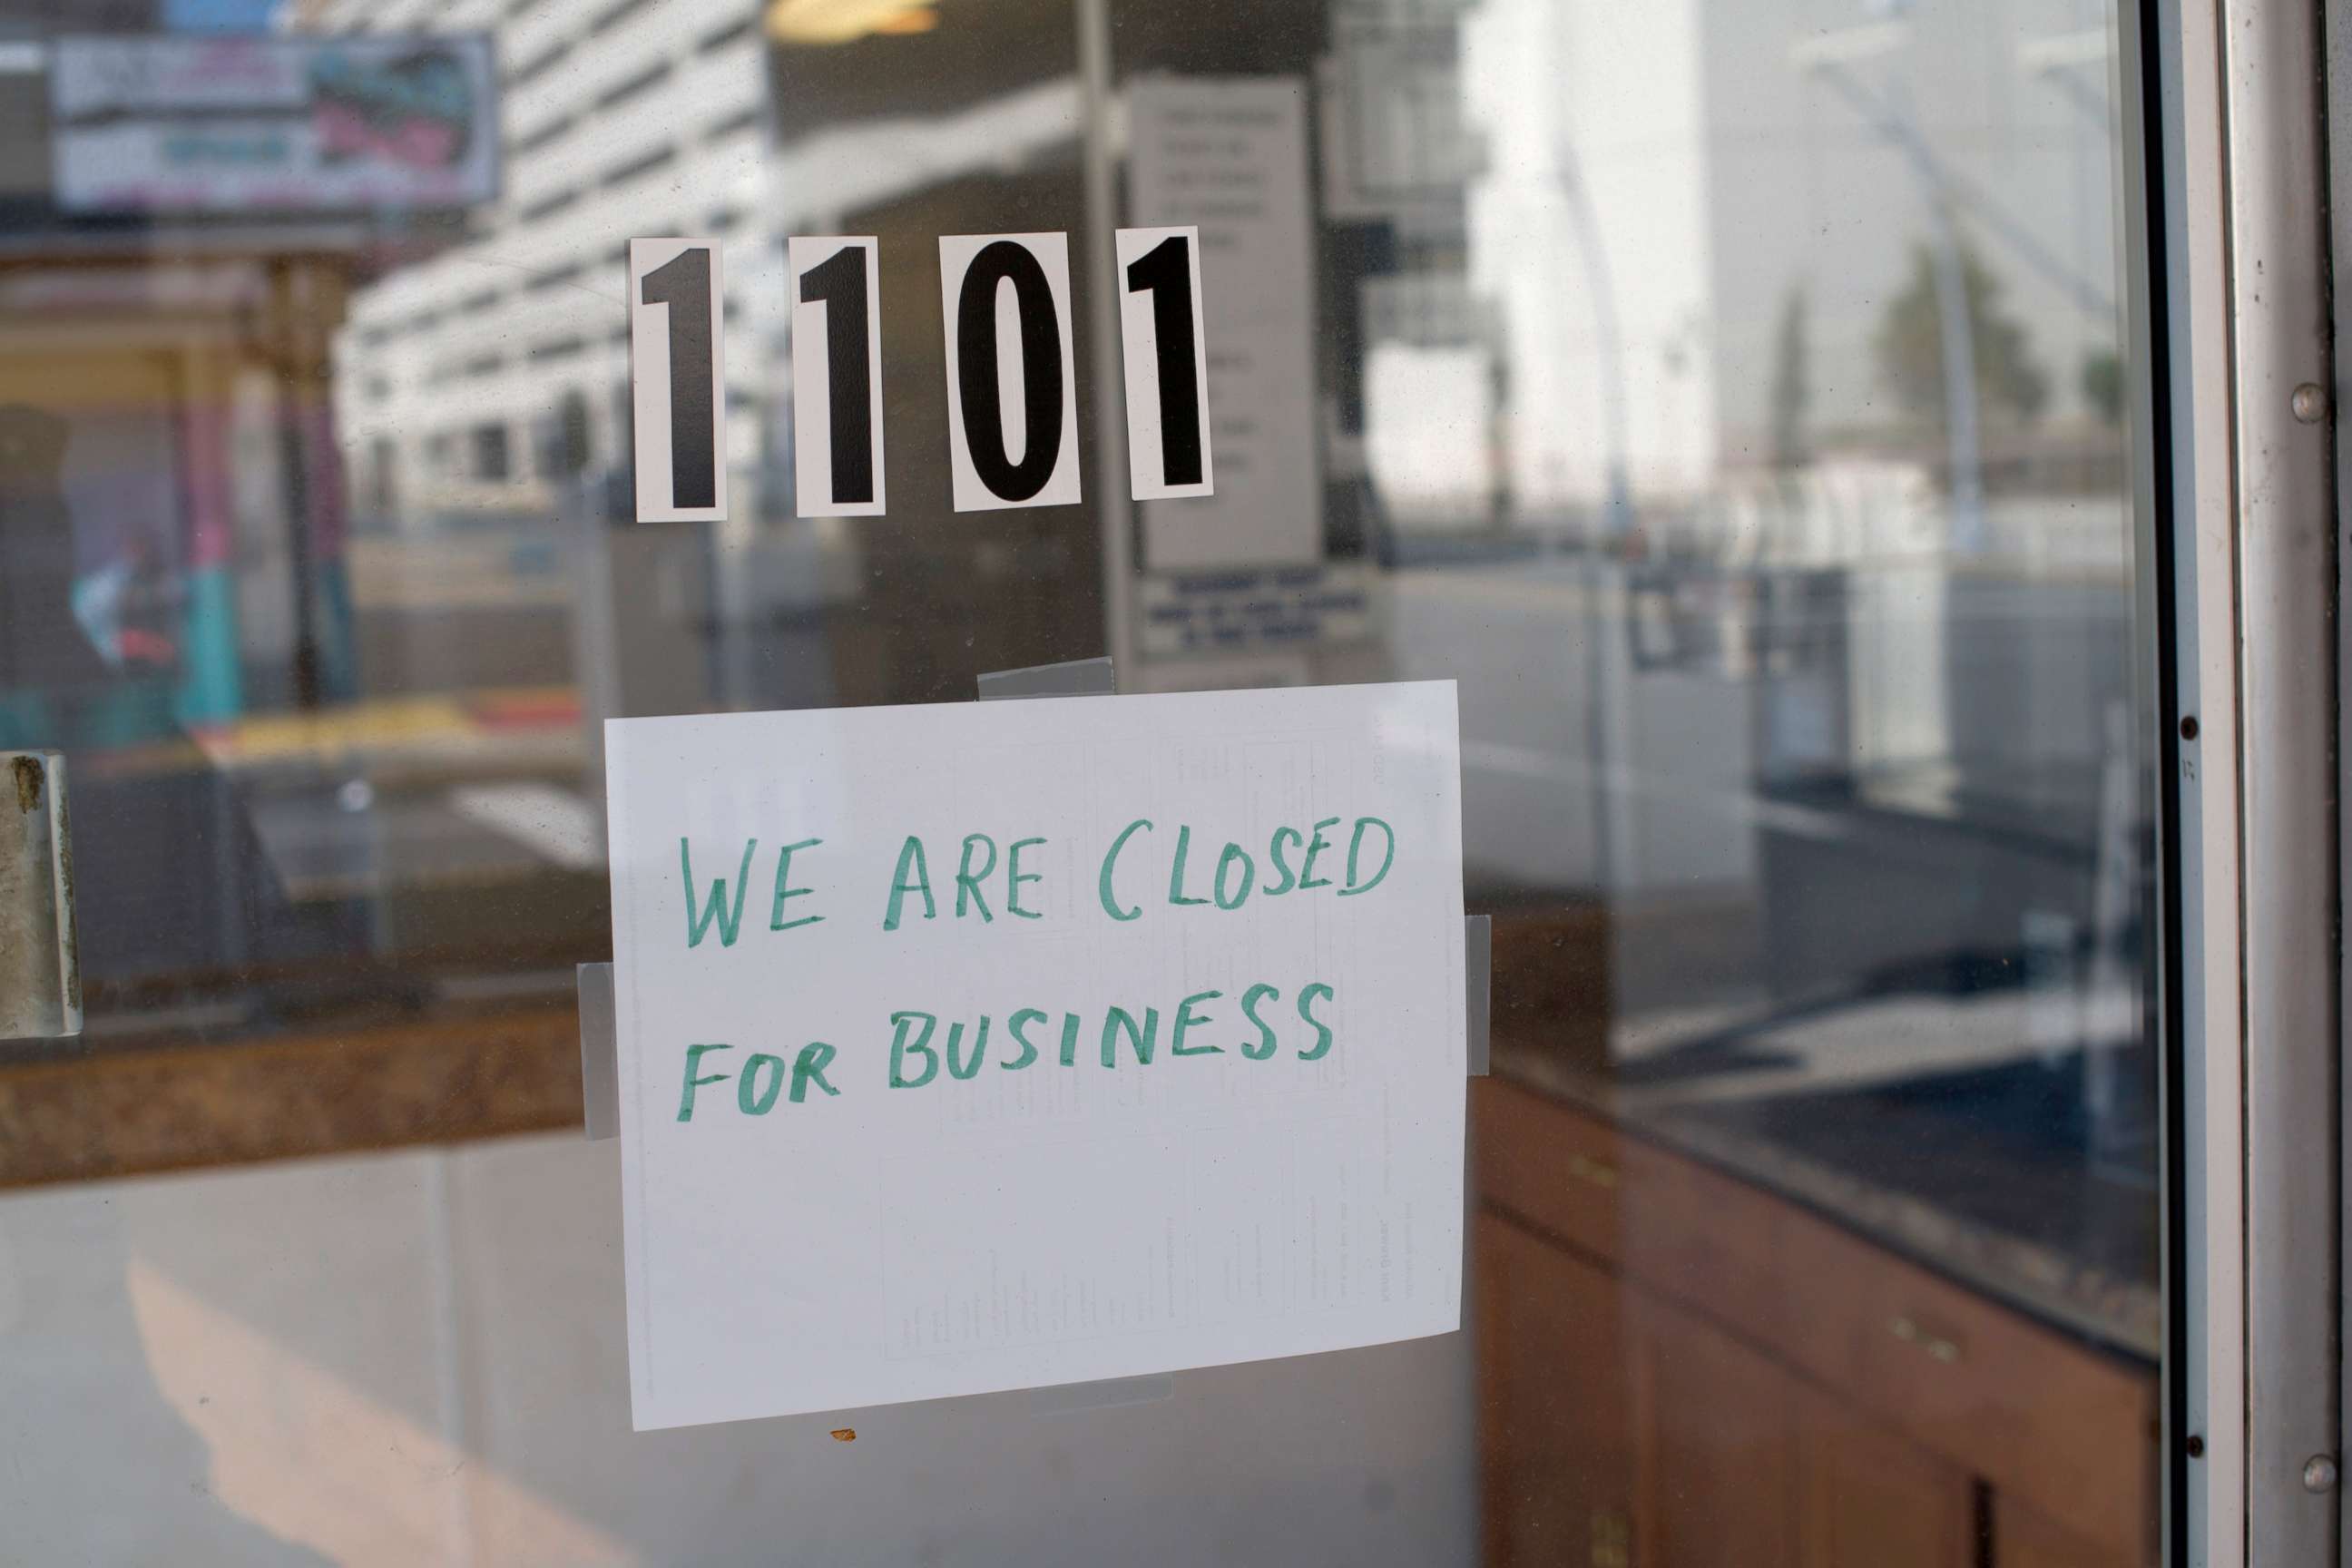 PHOTO: A sign at a motel lobby states "WE ARE CLOSED FOR BUSINESS" during the coronavirus pandemic on May 7, 2020 in Atlantic City, New Jersey.